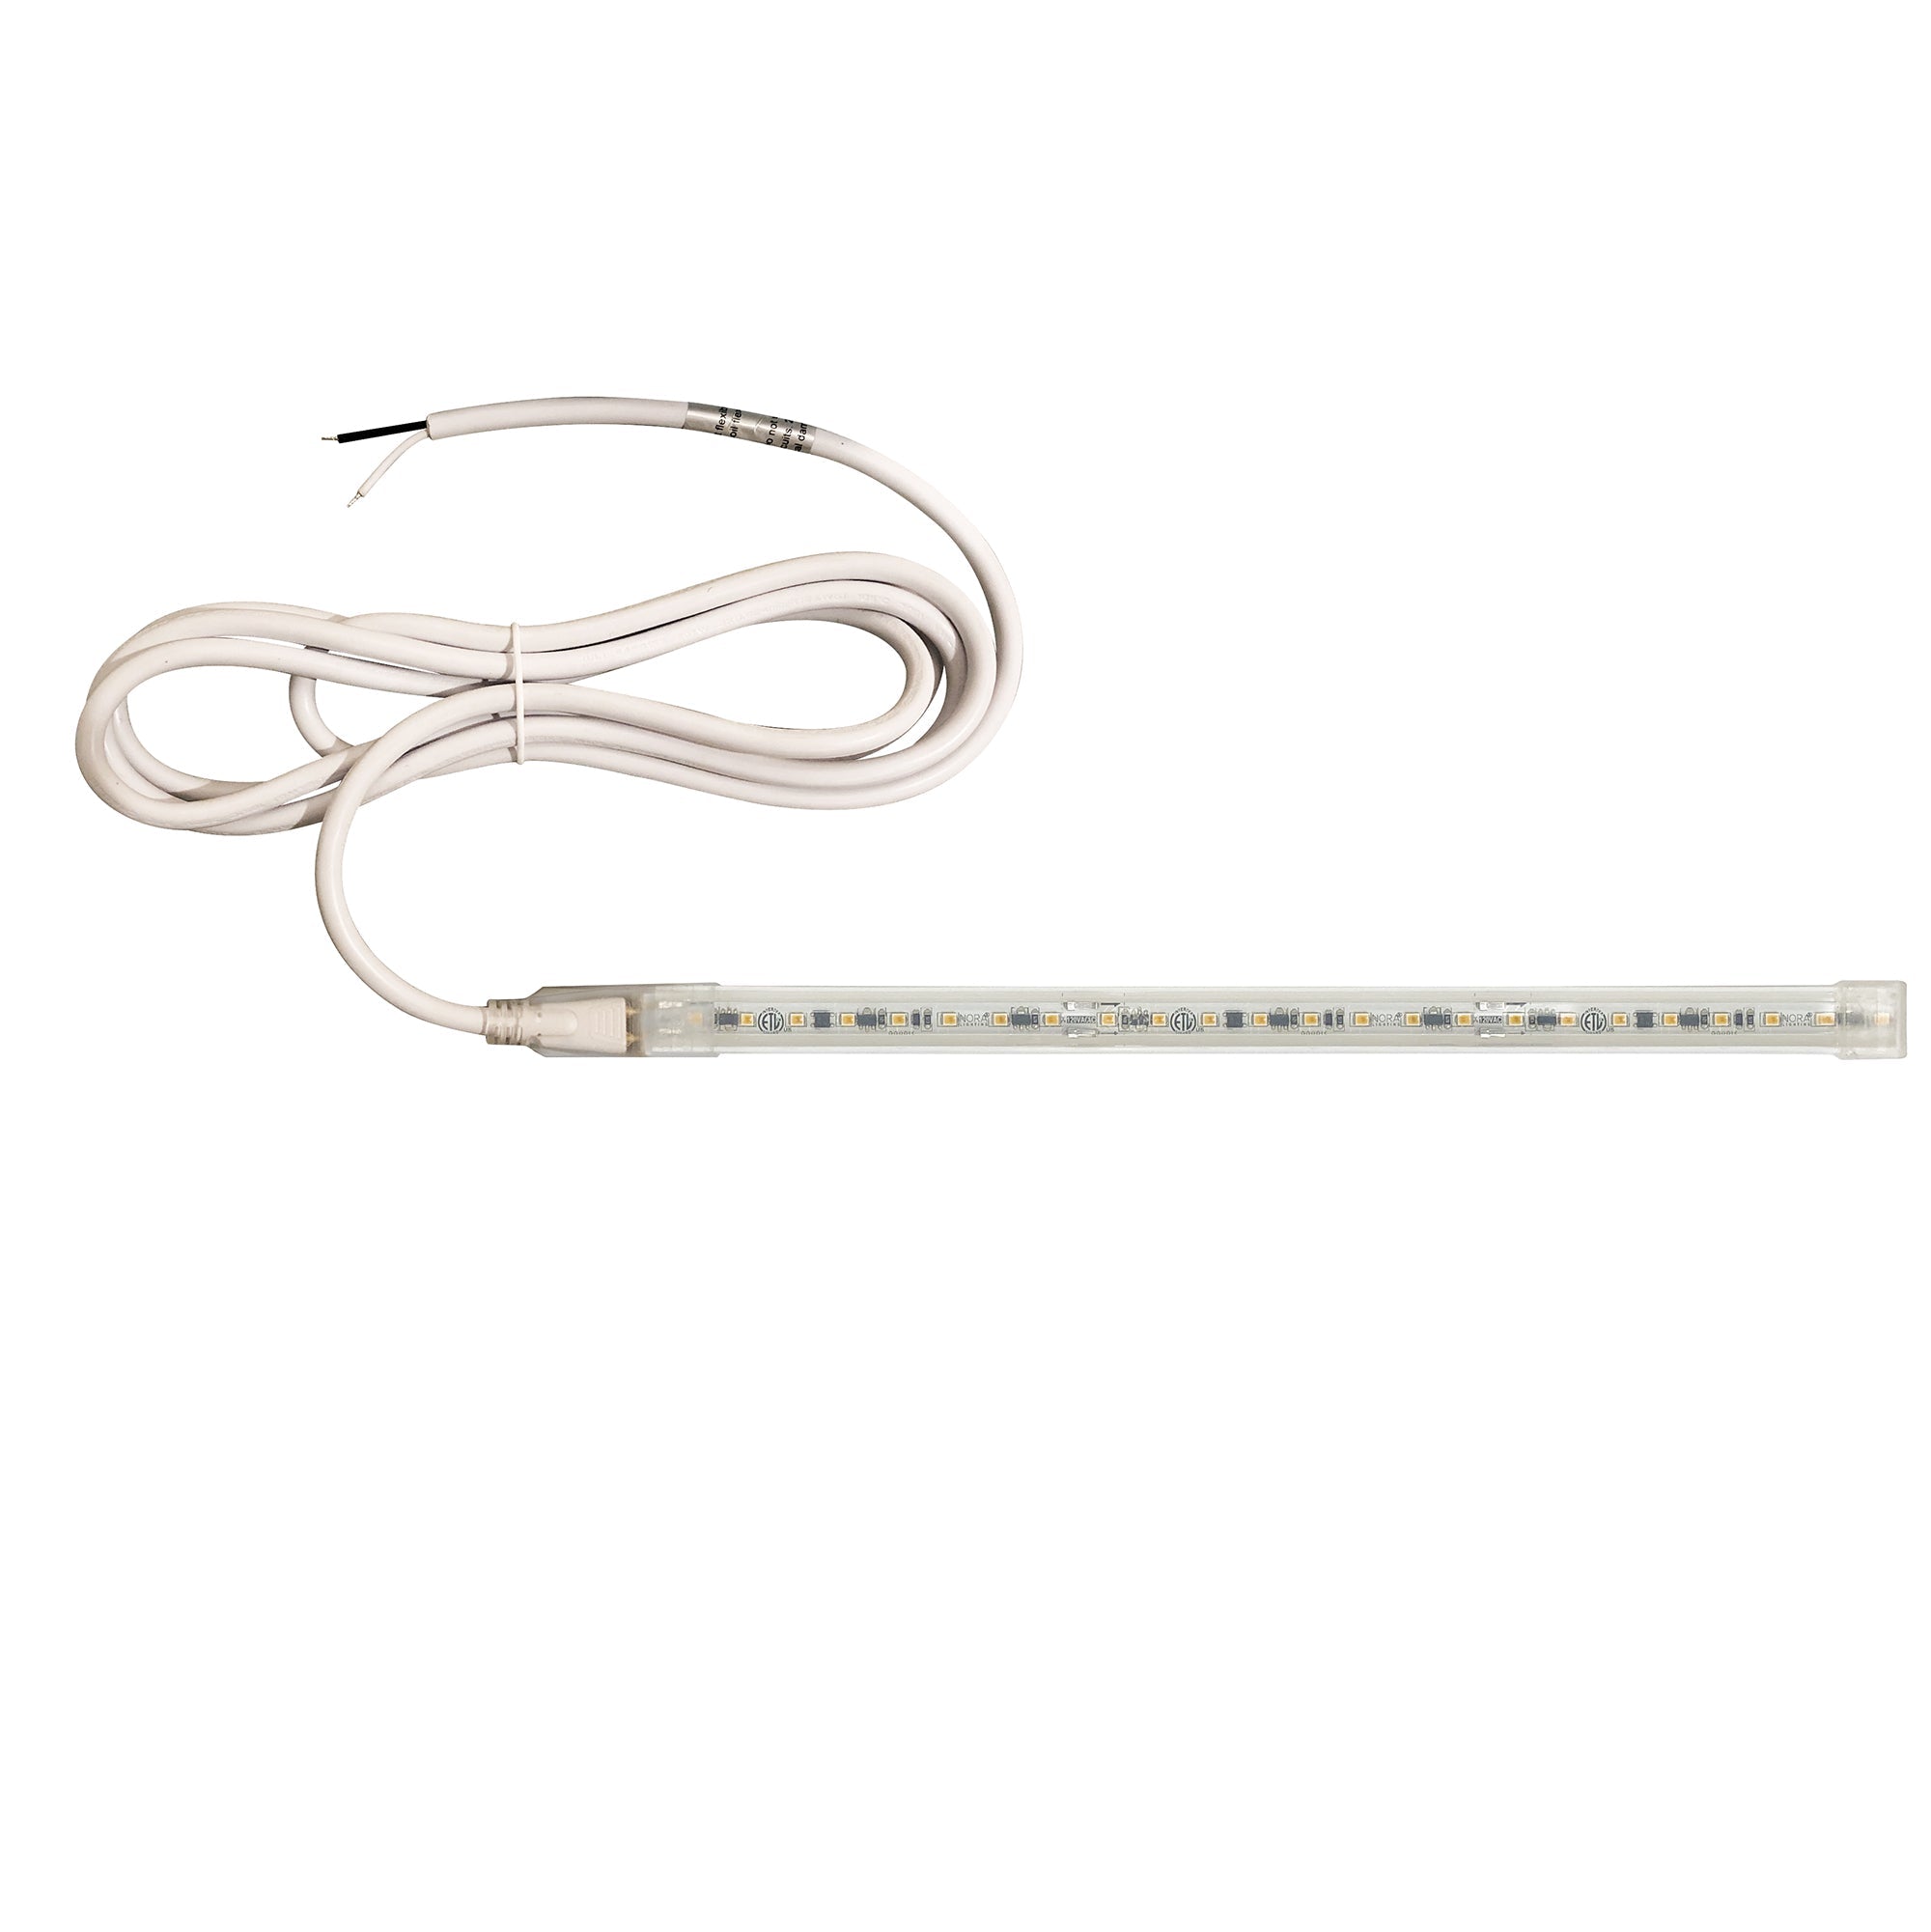 Nora Lighting NUTP13-W10-4-12-927/HW - Accent / Undercabinet - Custom Cut 10-ft, 4-in 120V Continuous LED Tape Light, 330lm / 3.6W per foot, 2700K, w/ Mounting Clips and 8' Hardwired Power Cord